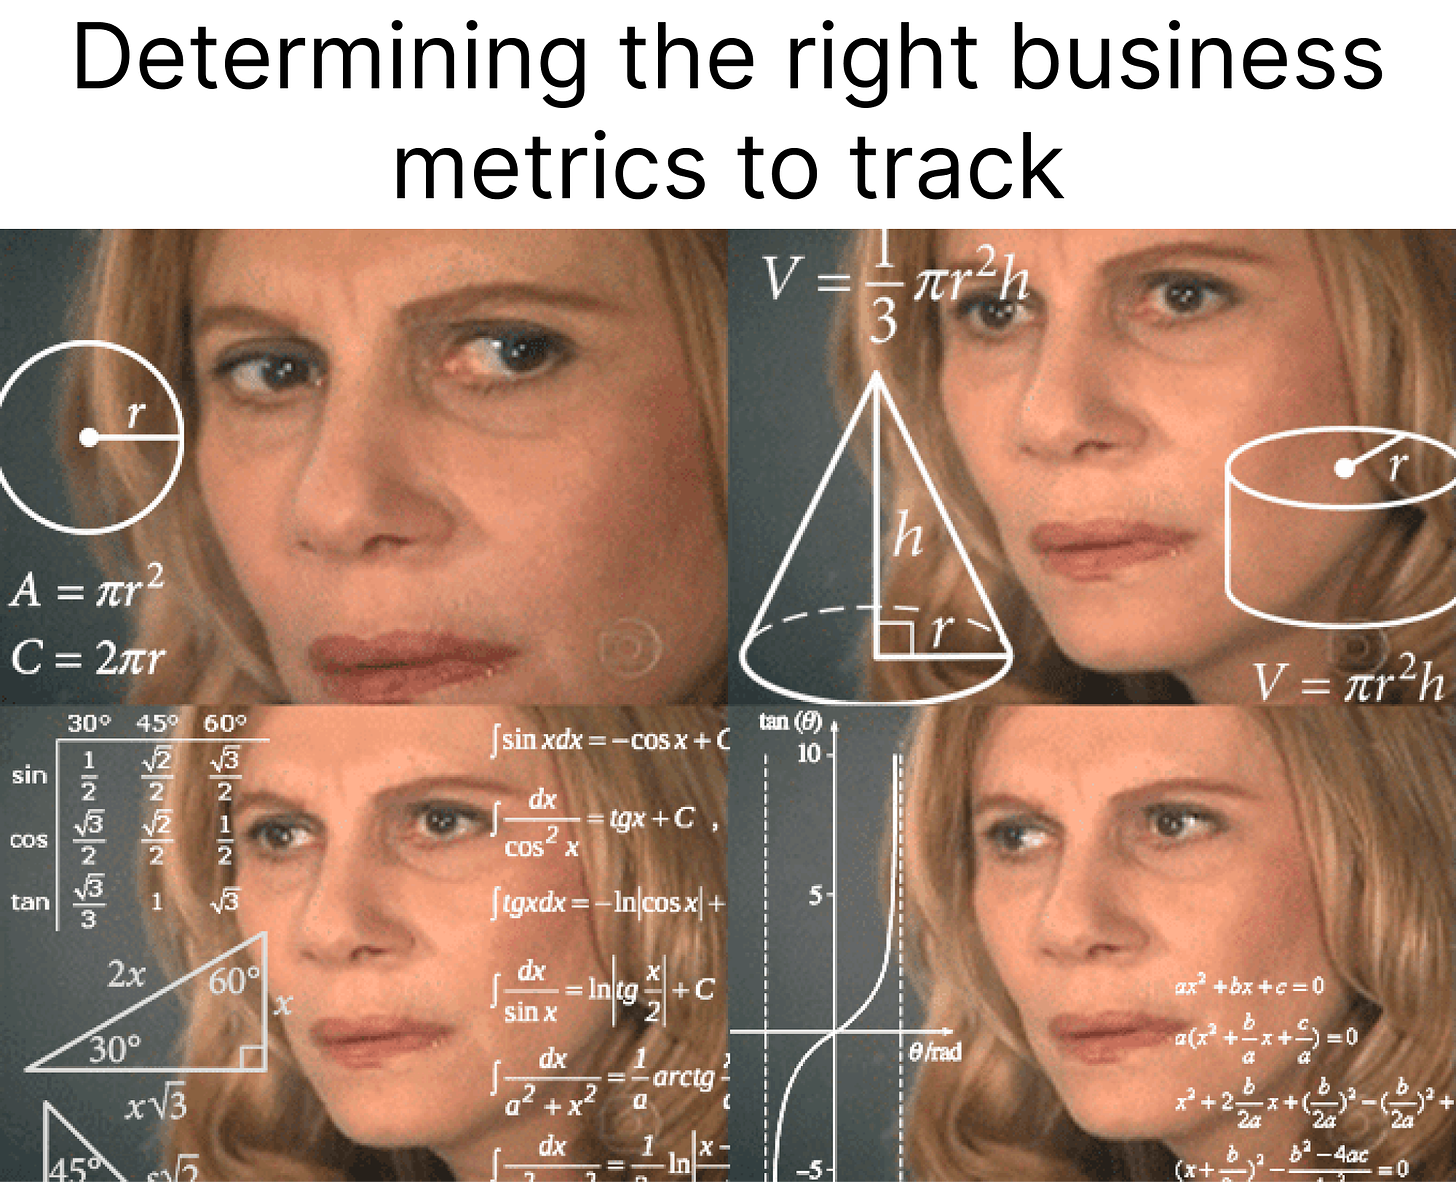 Caption: Determining the right business metrics to track.